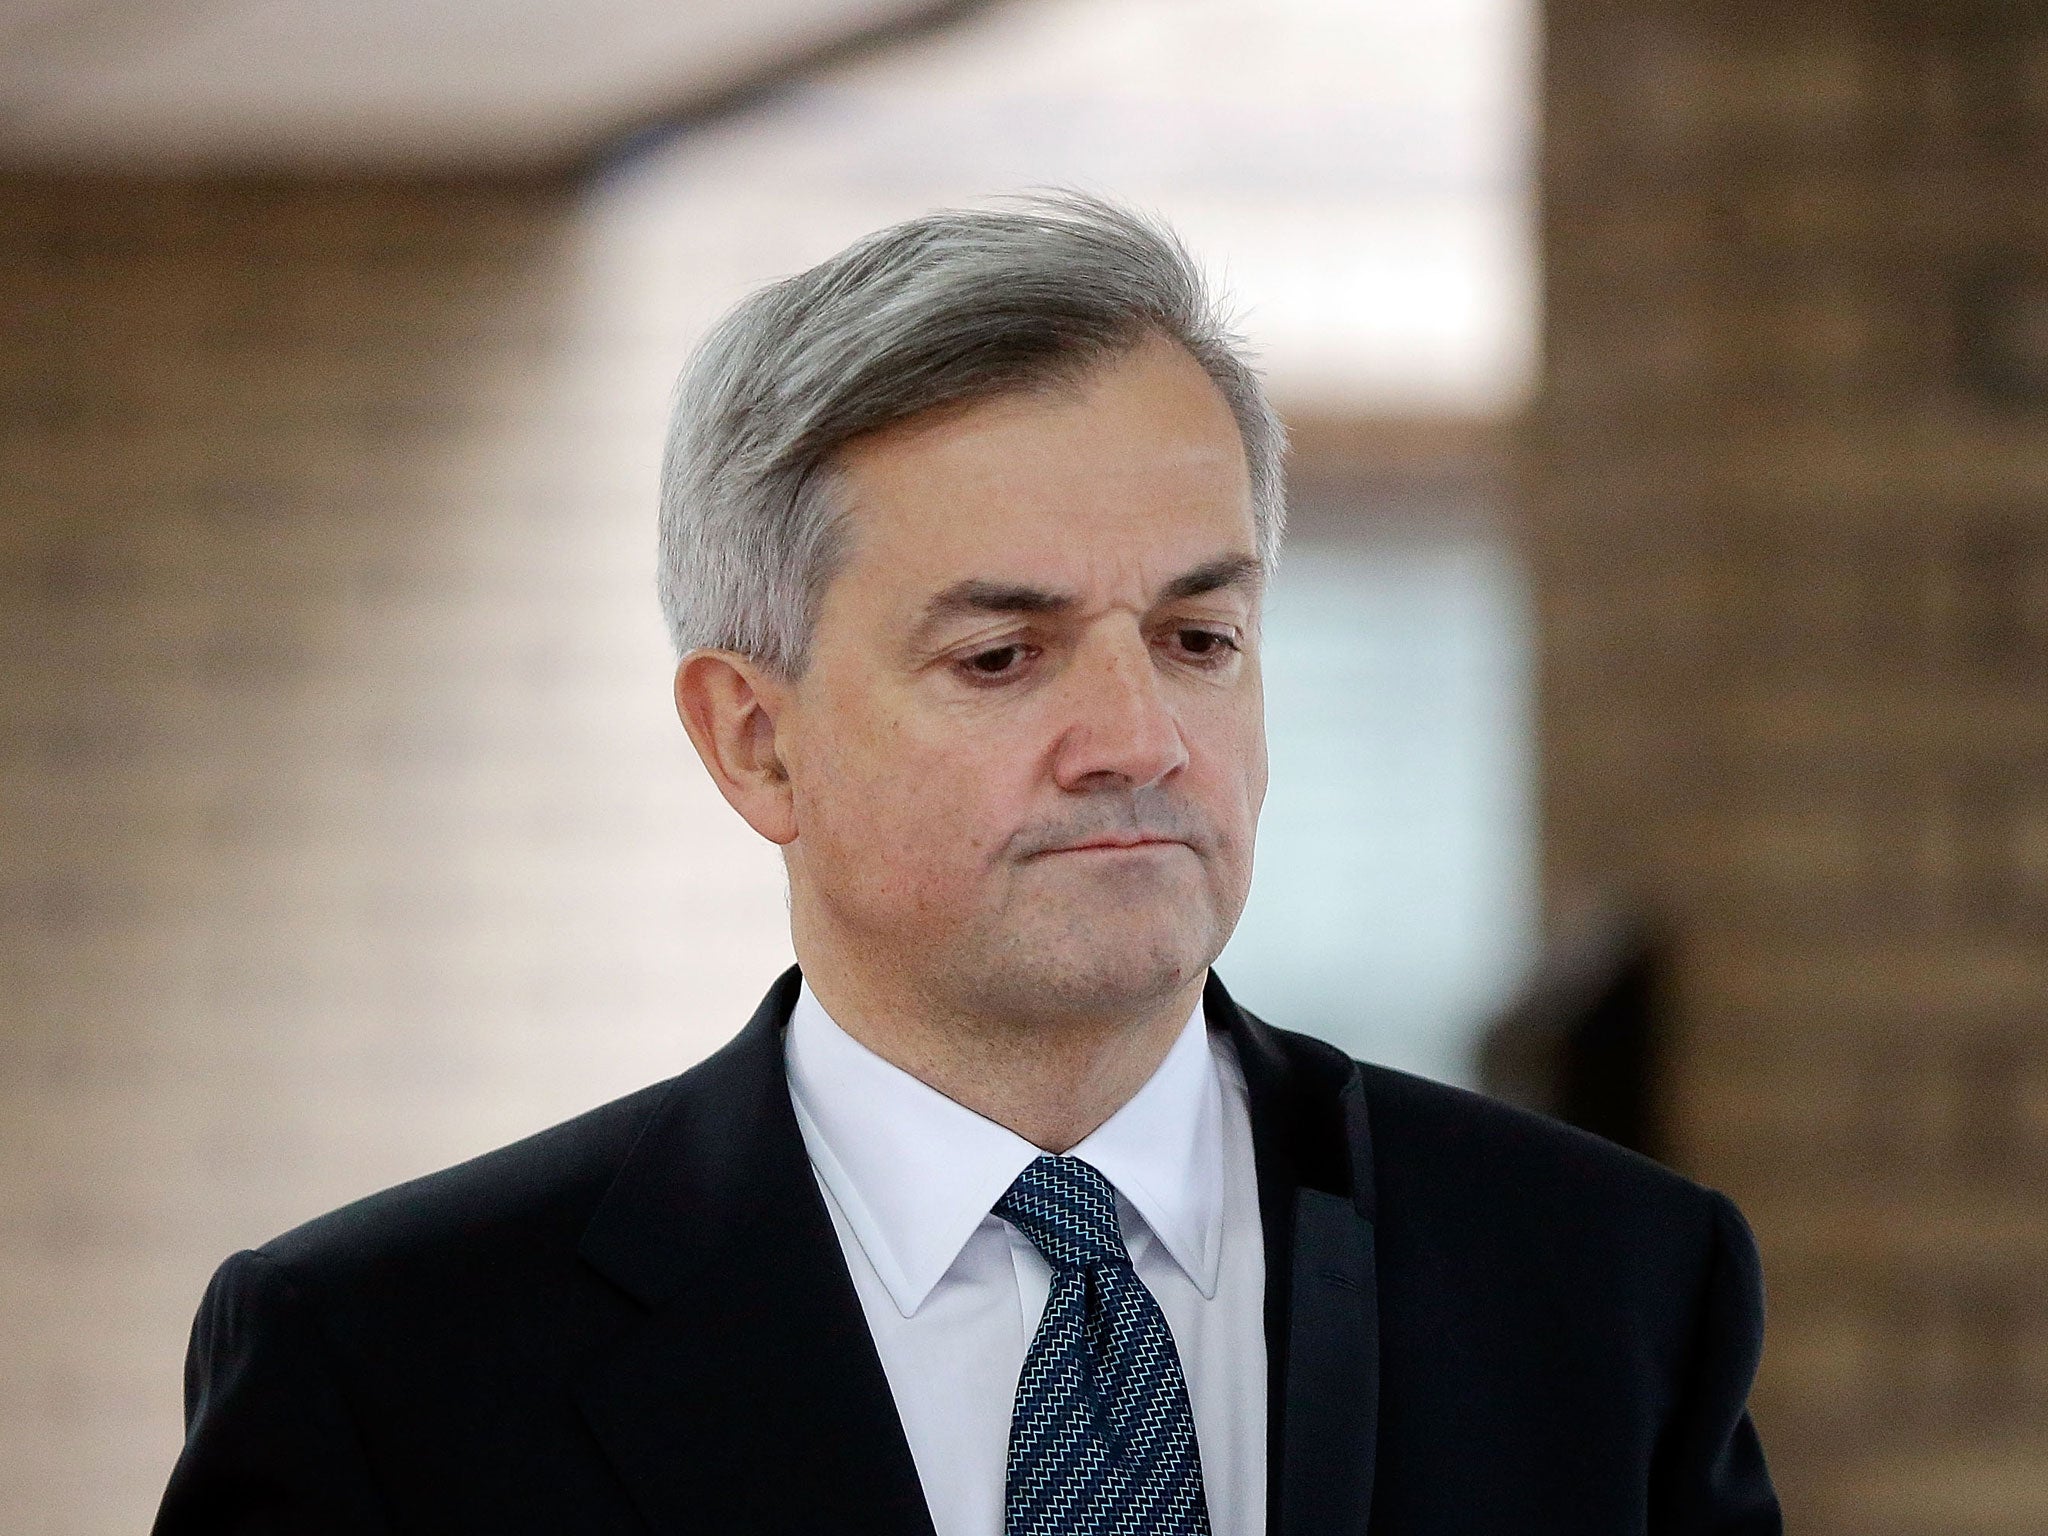 Former Cabinet Minister Chris Huhne leaves Southwark Crown Court to make a statement on February 4, 2013 in London, England.